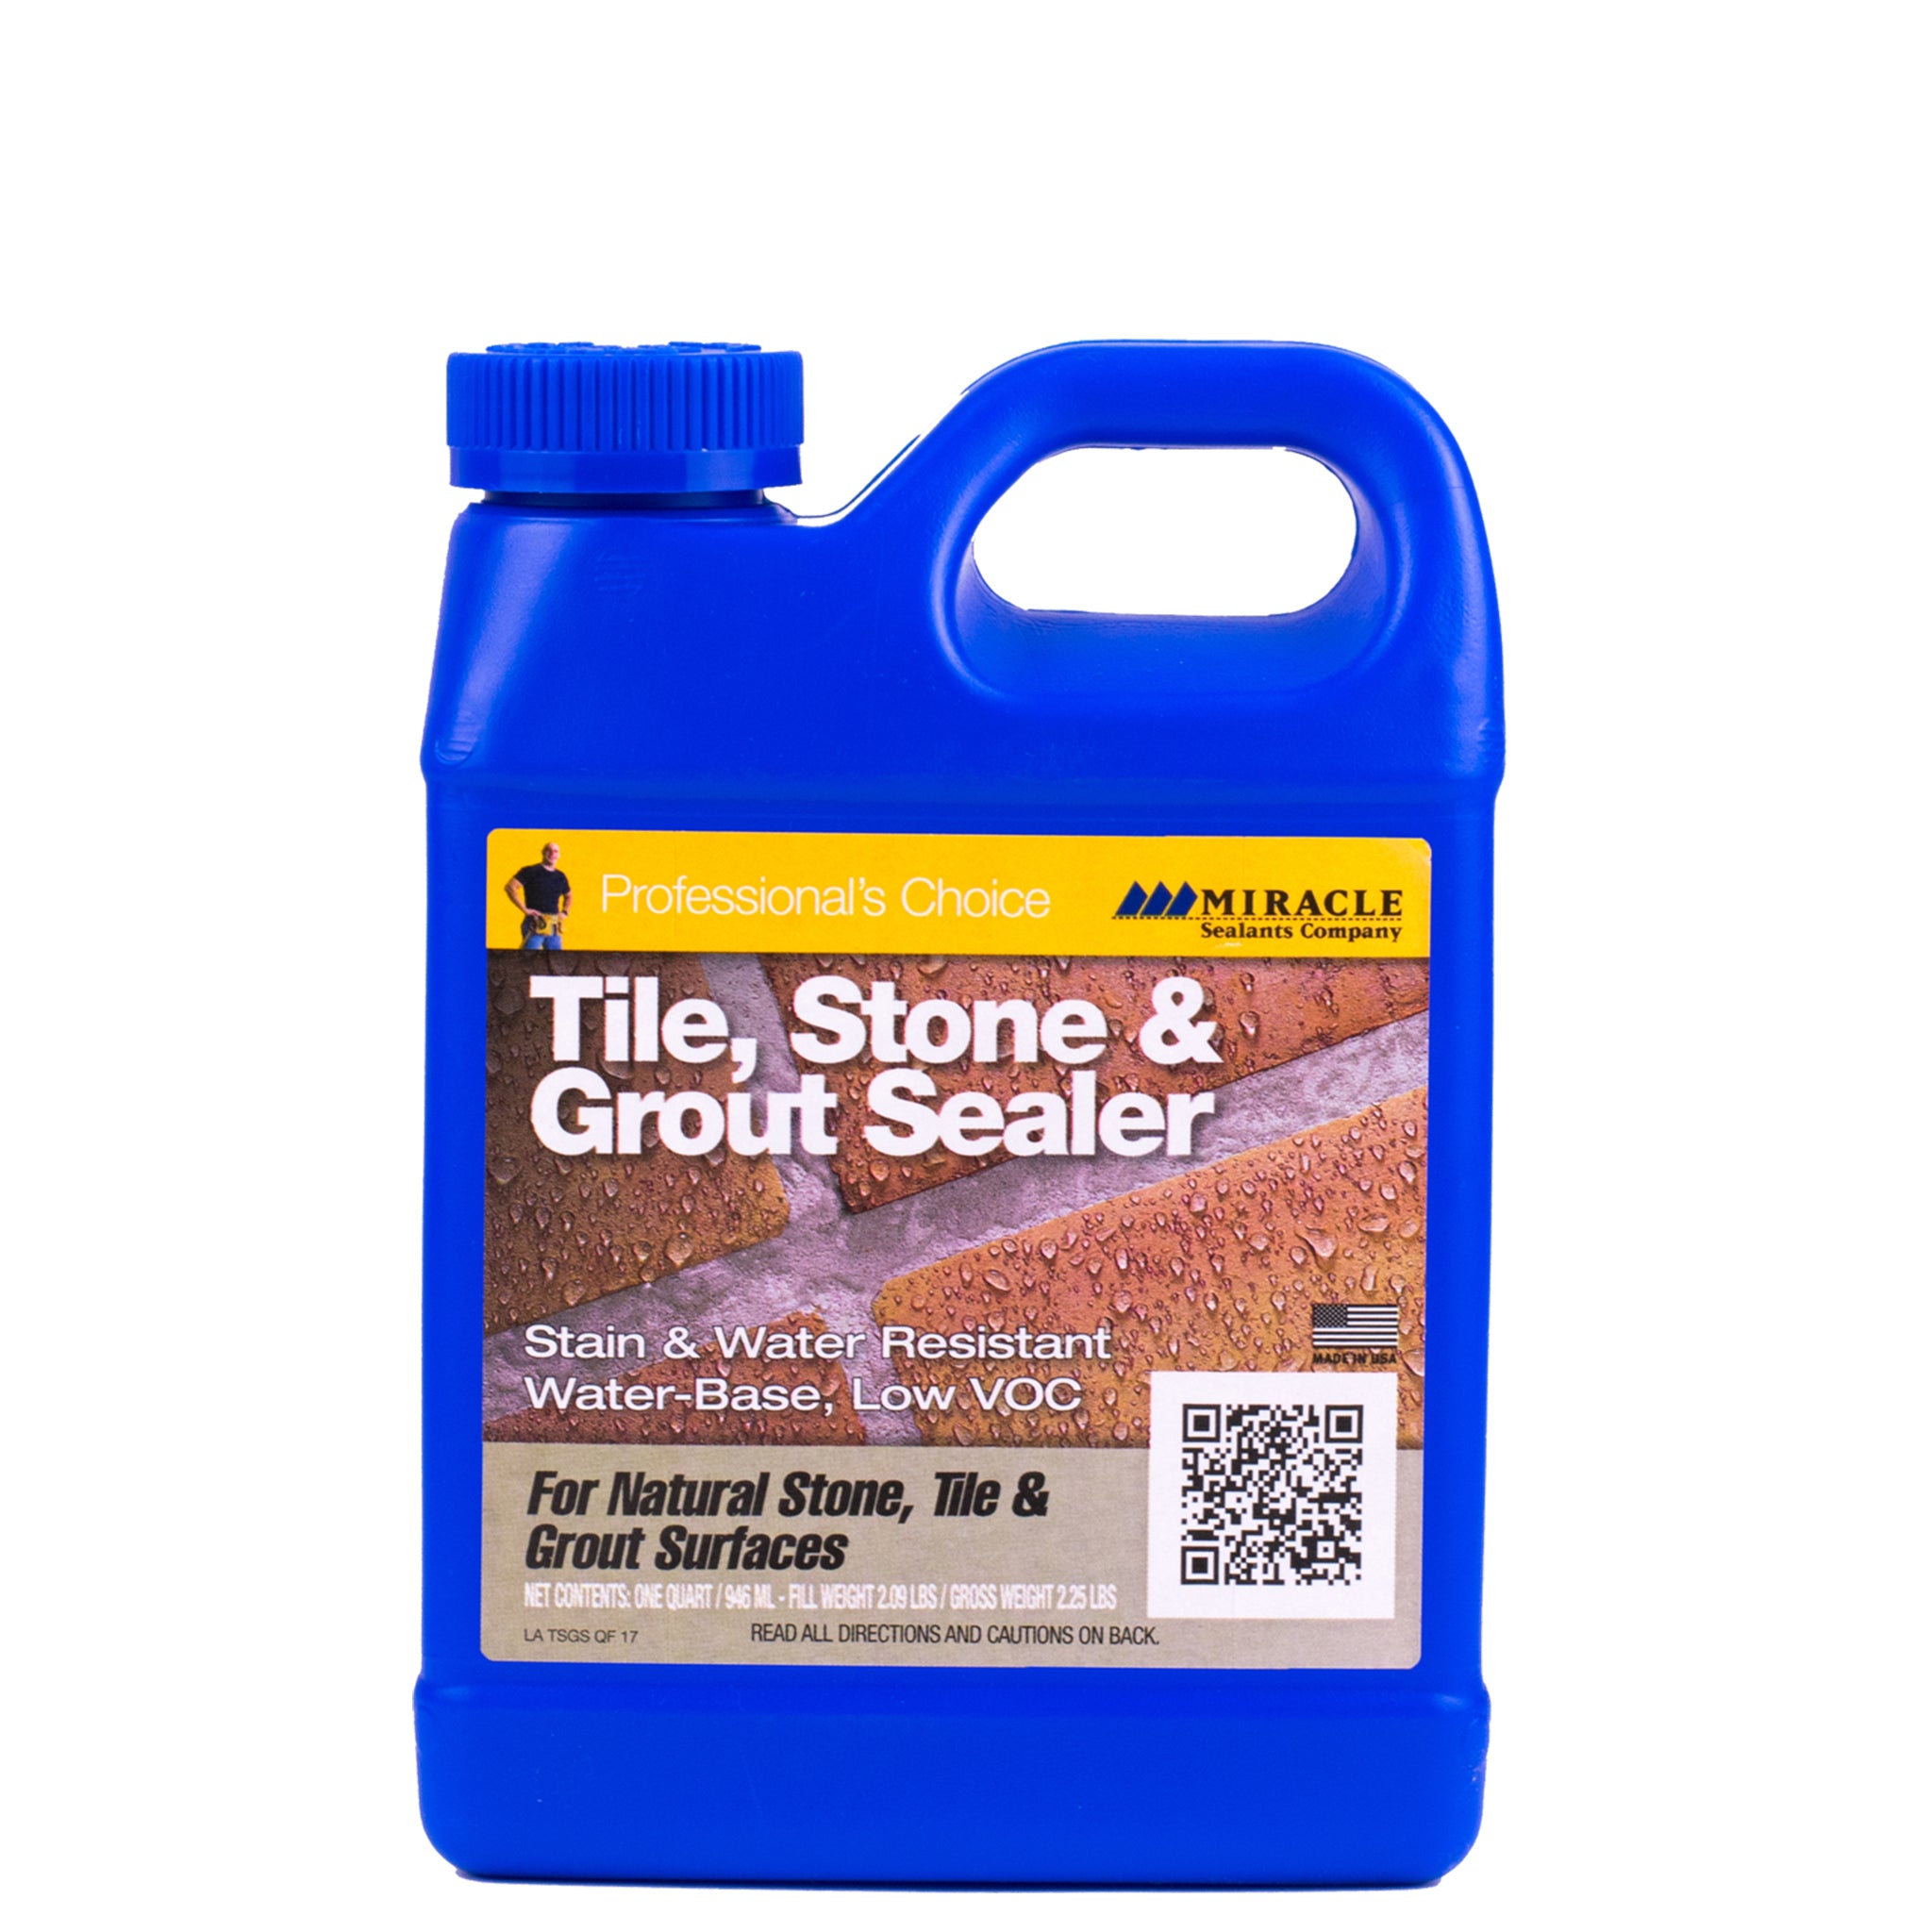 Miracle Tile Stone & Grout Sealer